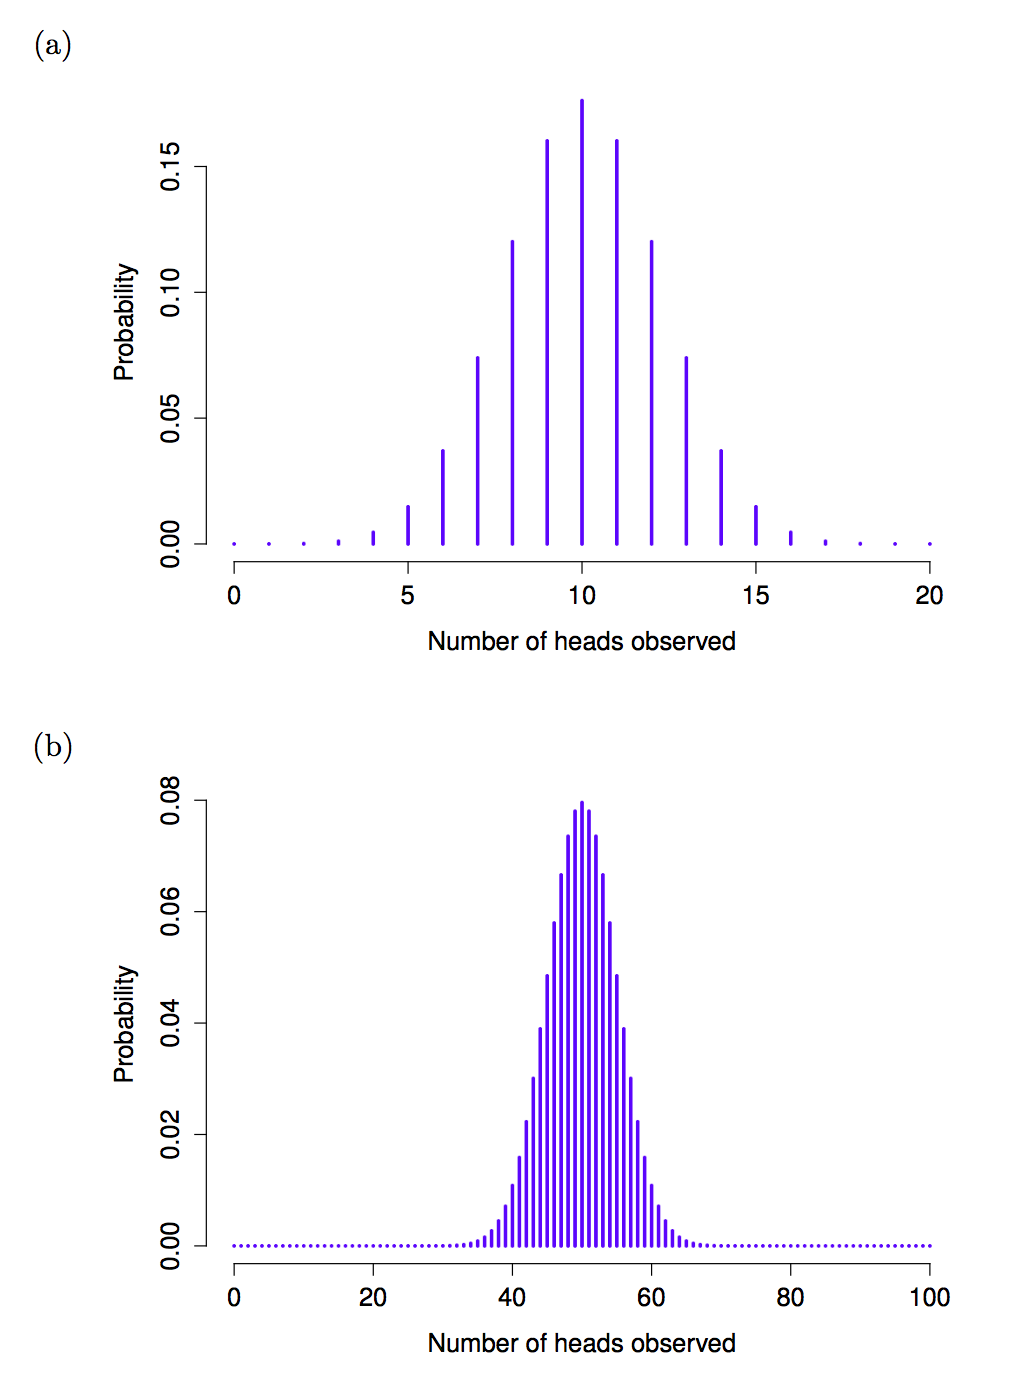 Two binomial distributions, involving a scenario in which I'm flipping a fair coin, so the underlying success probability is 1/2. In panel (a), we assume I'm flipping the coin N = 20 times. In panel (b) we assume that the coin is flipped N = 100 times.